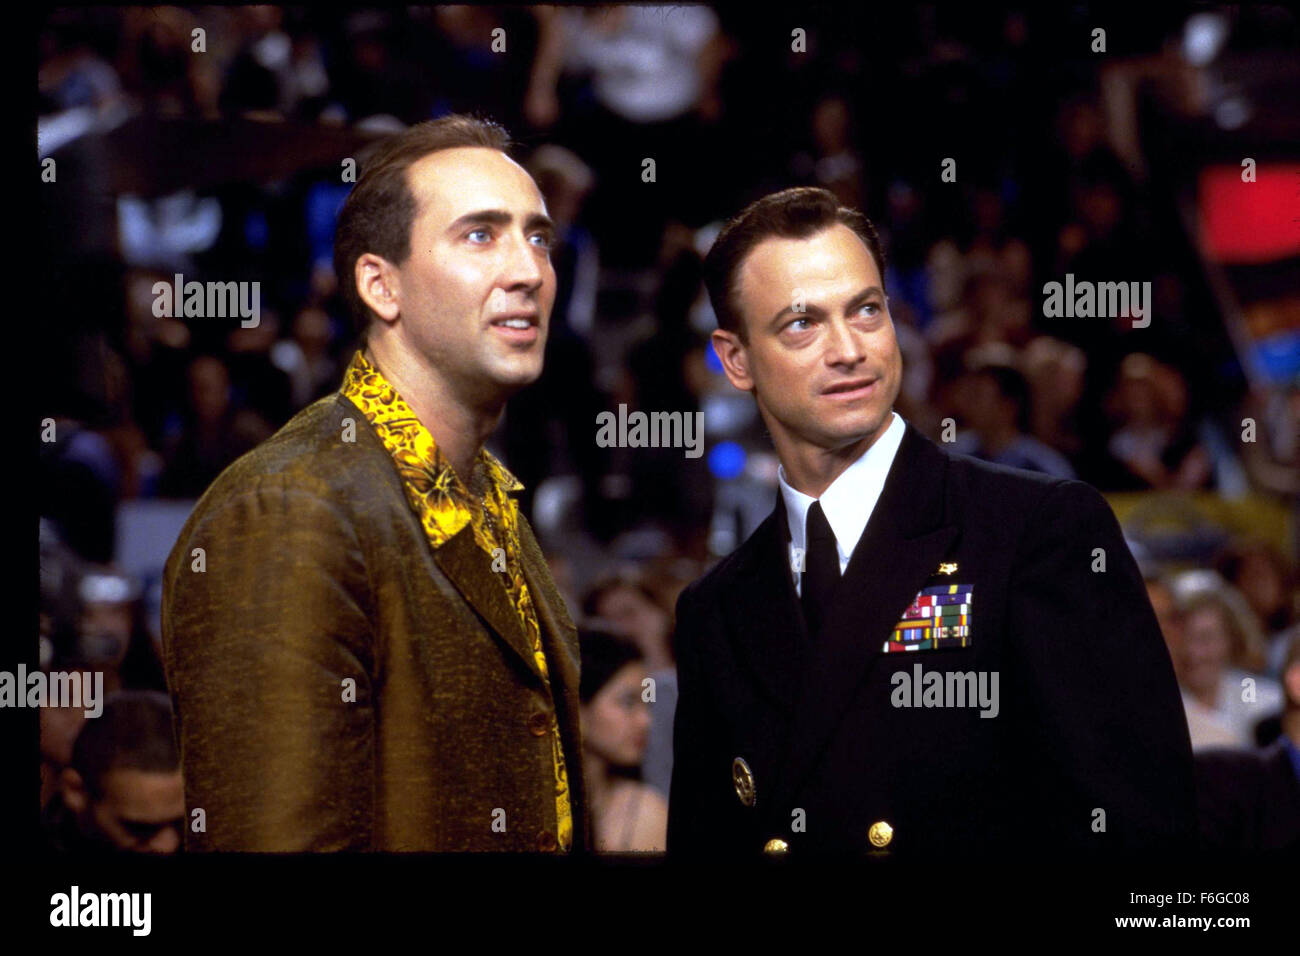 Jul 30, 1998; Hollywood, CA, USA; NICOLAS CAGE as Rick Santoro and GARY SINISE as Commander Kevin Dunne star in Paramount/Touchstone Pictures action thriller 'Snake Eyes' directed by Brian De Palma. Stock Photo